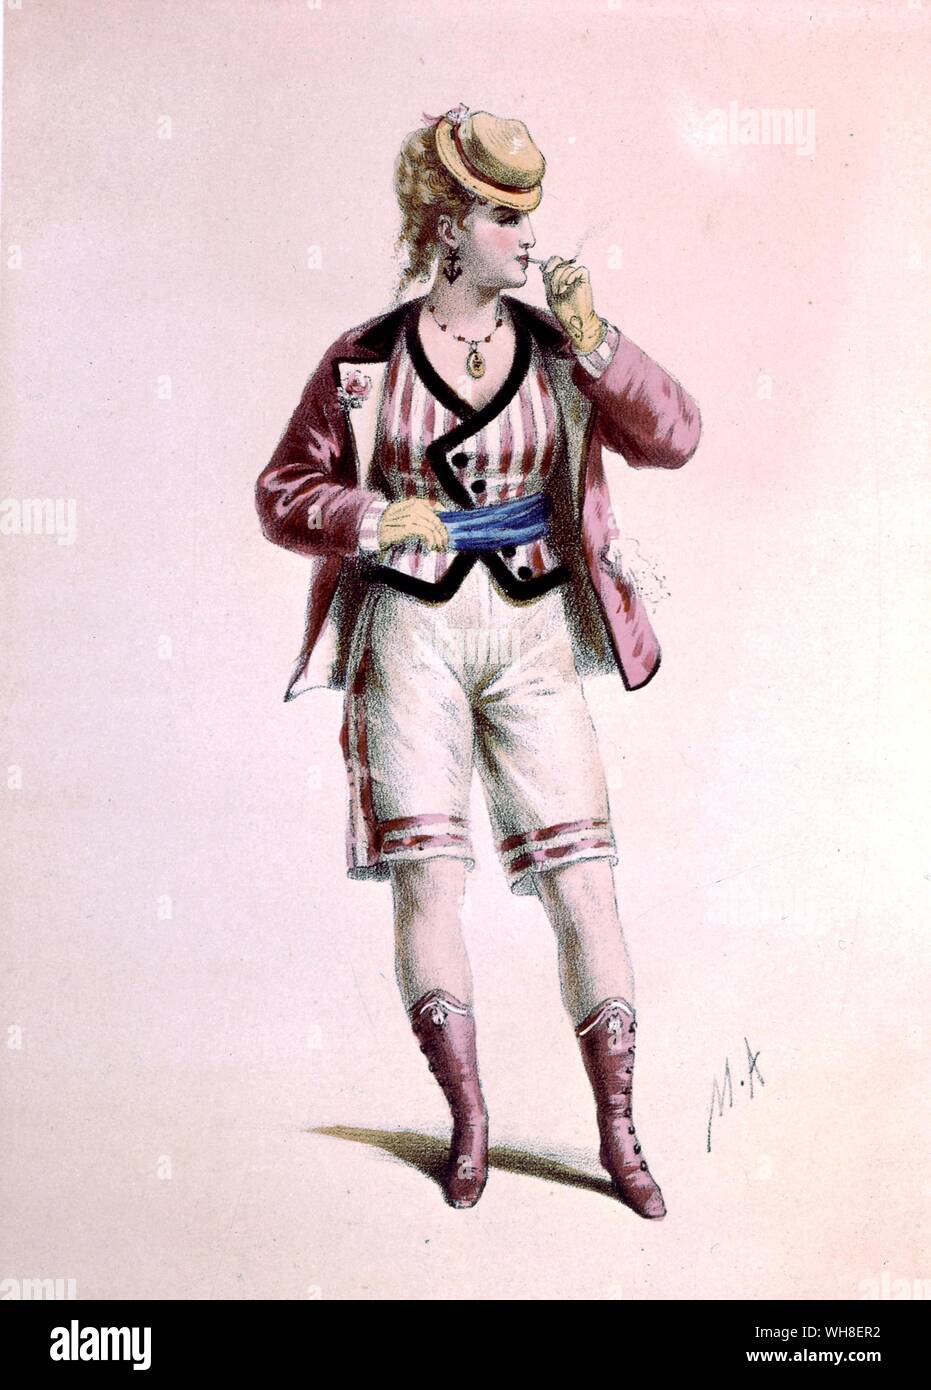 Boating Enthusiast, Costumes des theatres (Costumes of the theatres) 1860. From La Vie Parisienne by Joanna Richardson (1860) page 9. La Vie Parisienne (Parisian Life) is by by Jacques Offenbach (1819-1880) and is a five-act opera about cosmopolitan life in Paris in the 1860s. Stock Photo